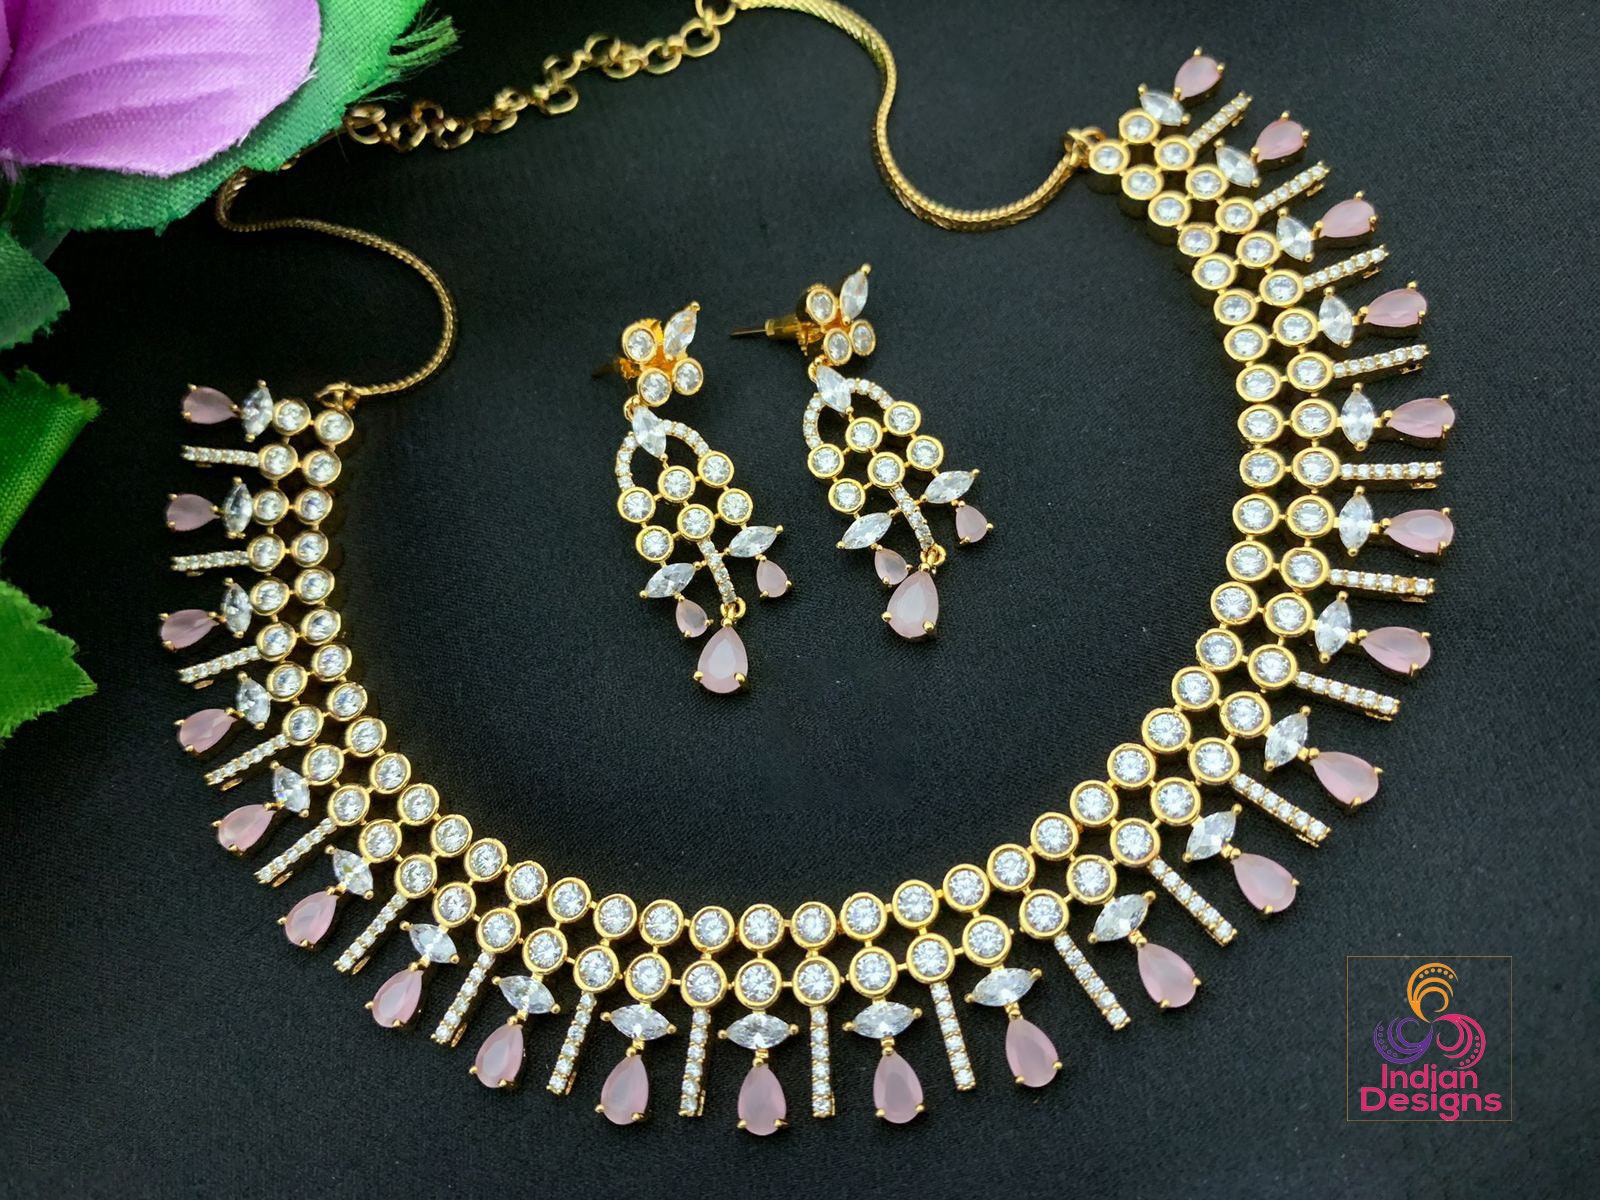 American Diamond necklace in pink stones and rose gold polish